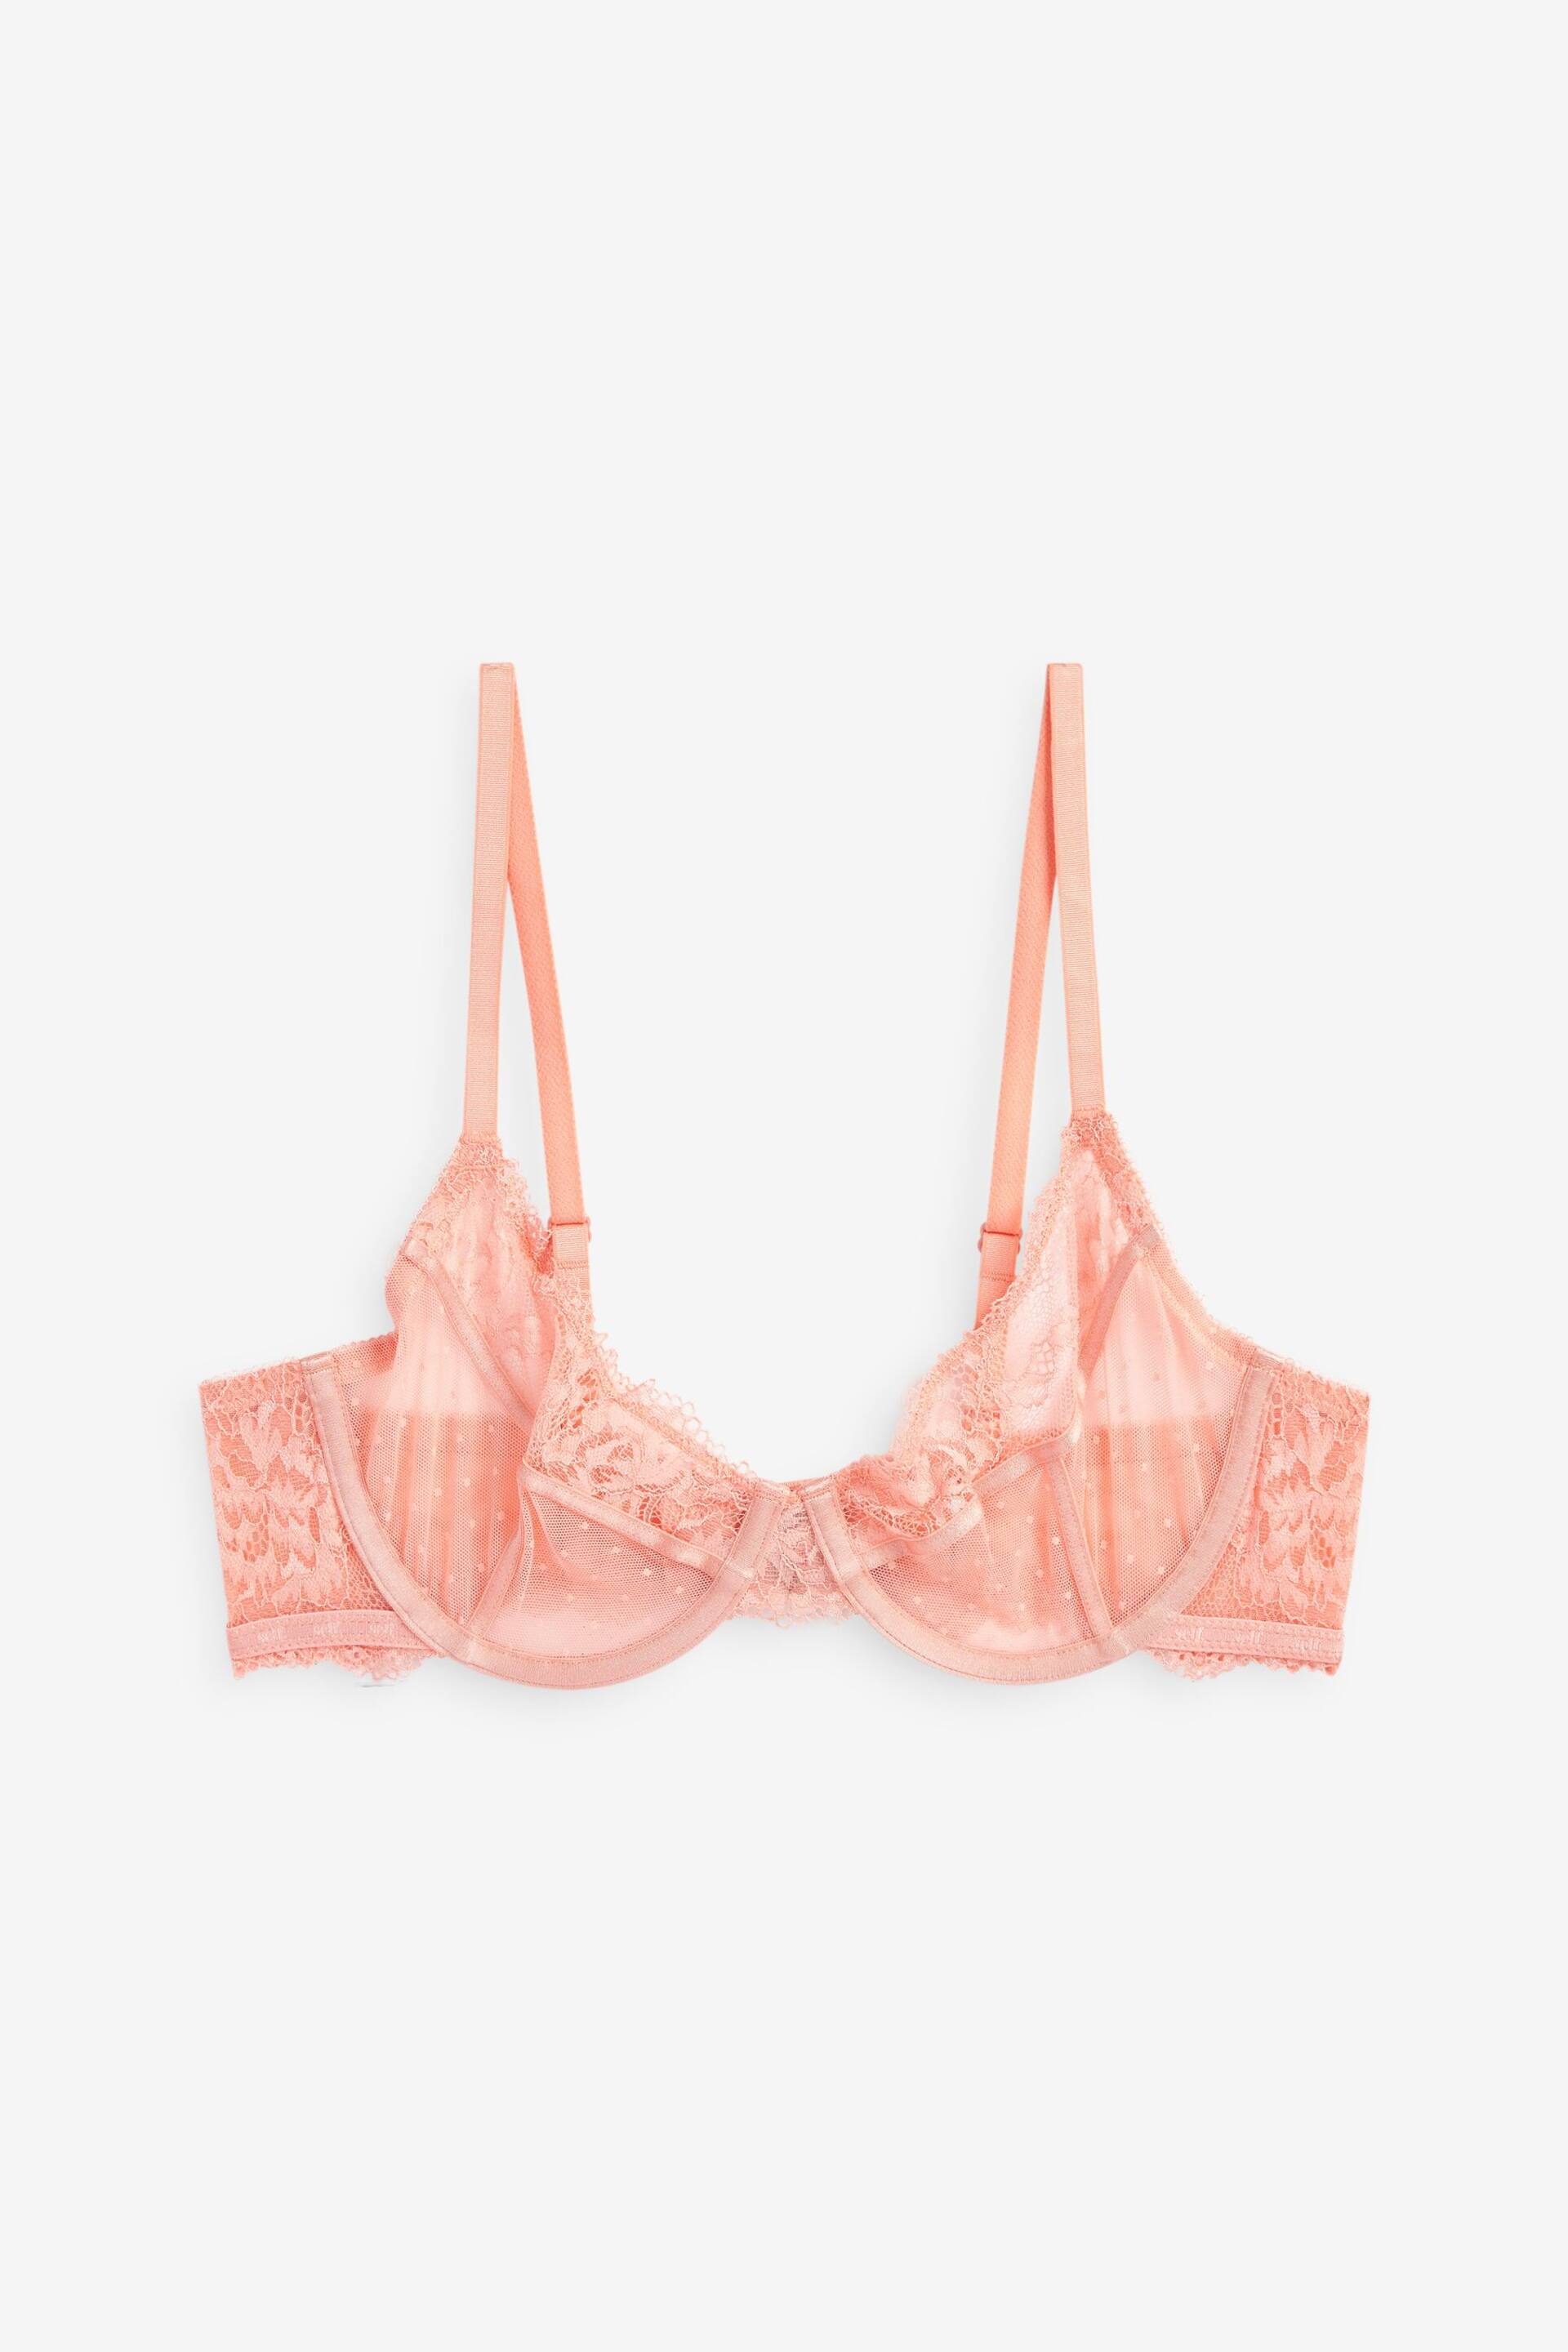 self. Pink Non Pad Wired Lace Balcony Bra - Image 9 of 10